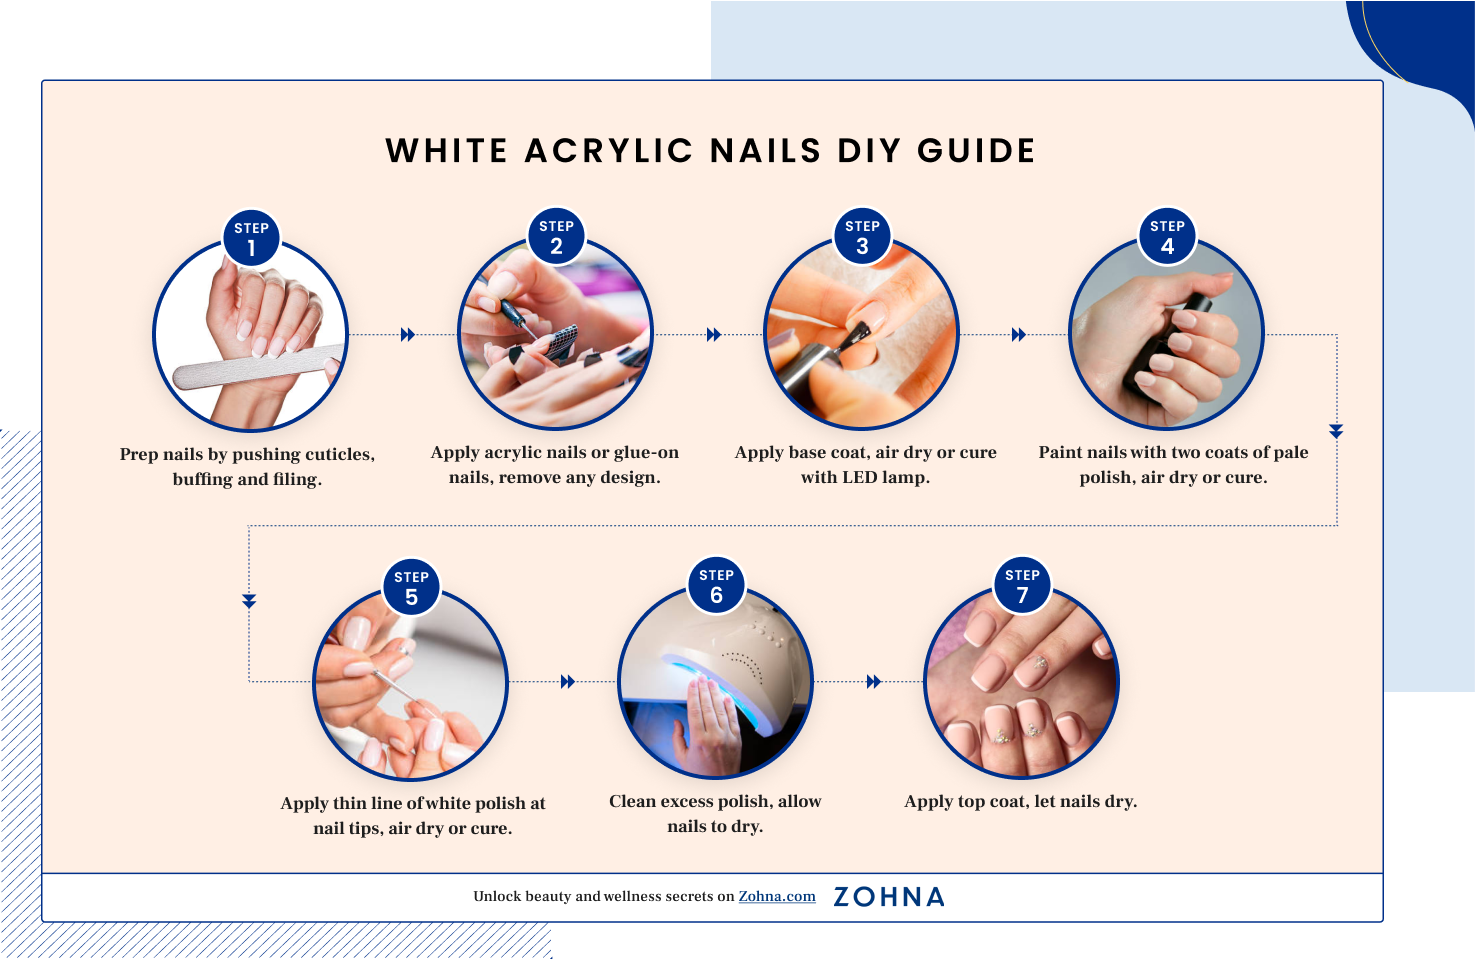 White Acrylic Nails DIY Guide